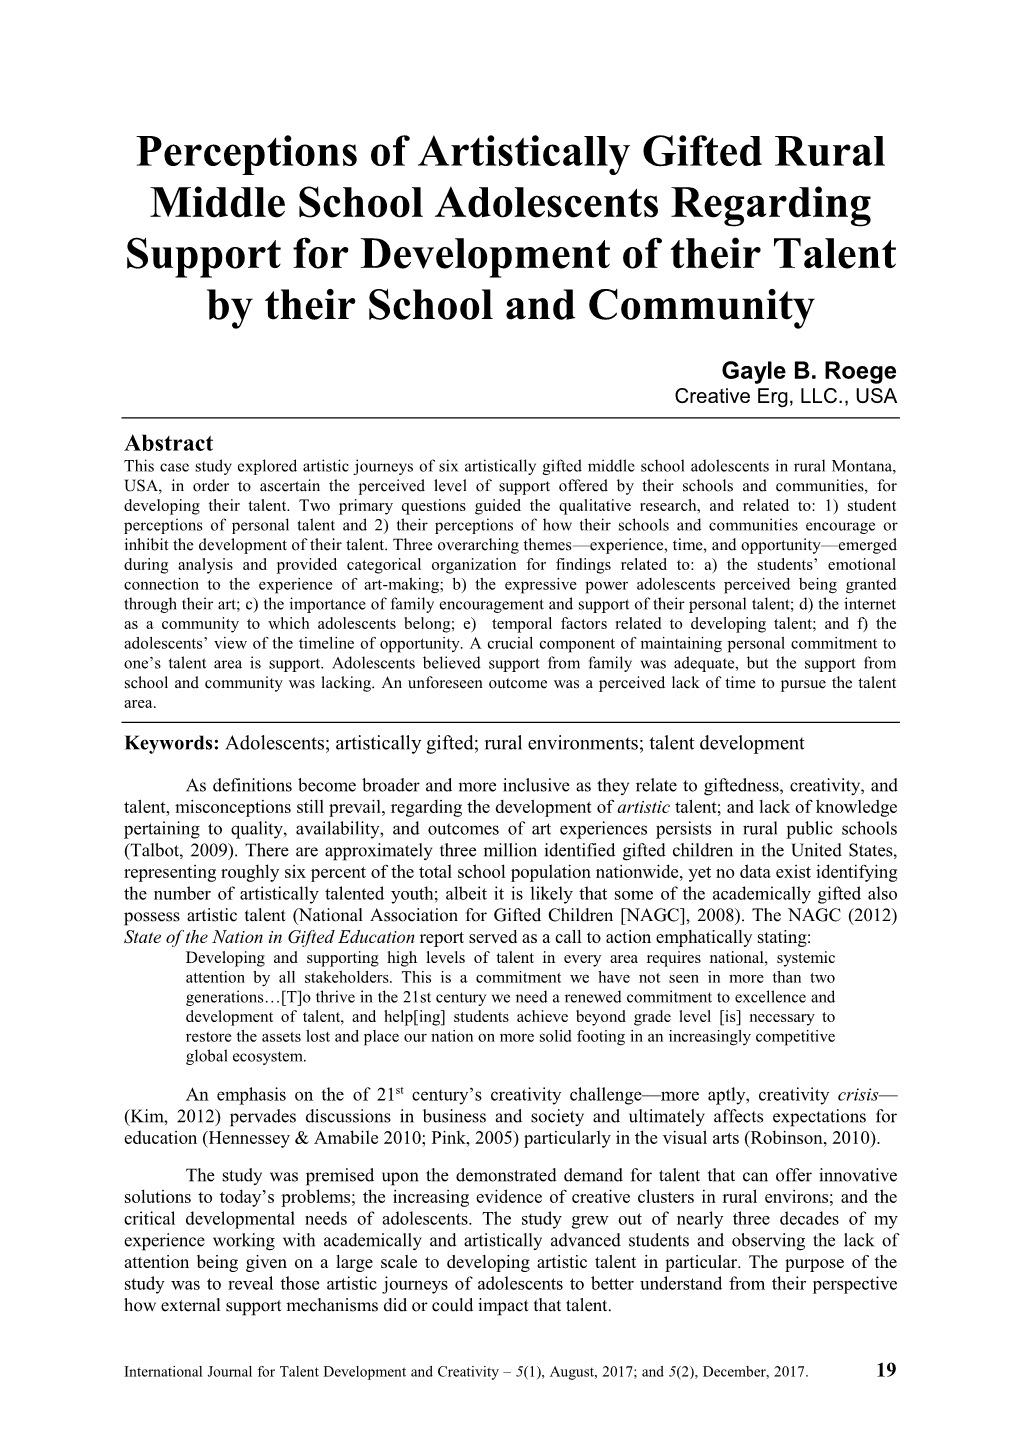 Perceptions of Artistically Gifted Rural Middle School Adolescents Regarding Support for Development of Their Talent by Their School and Community